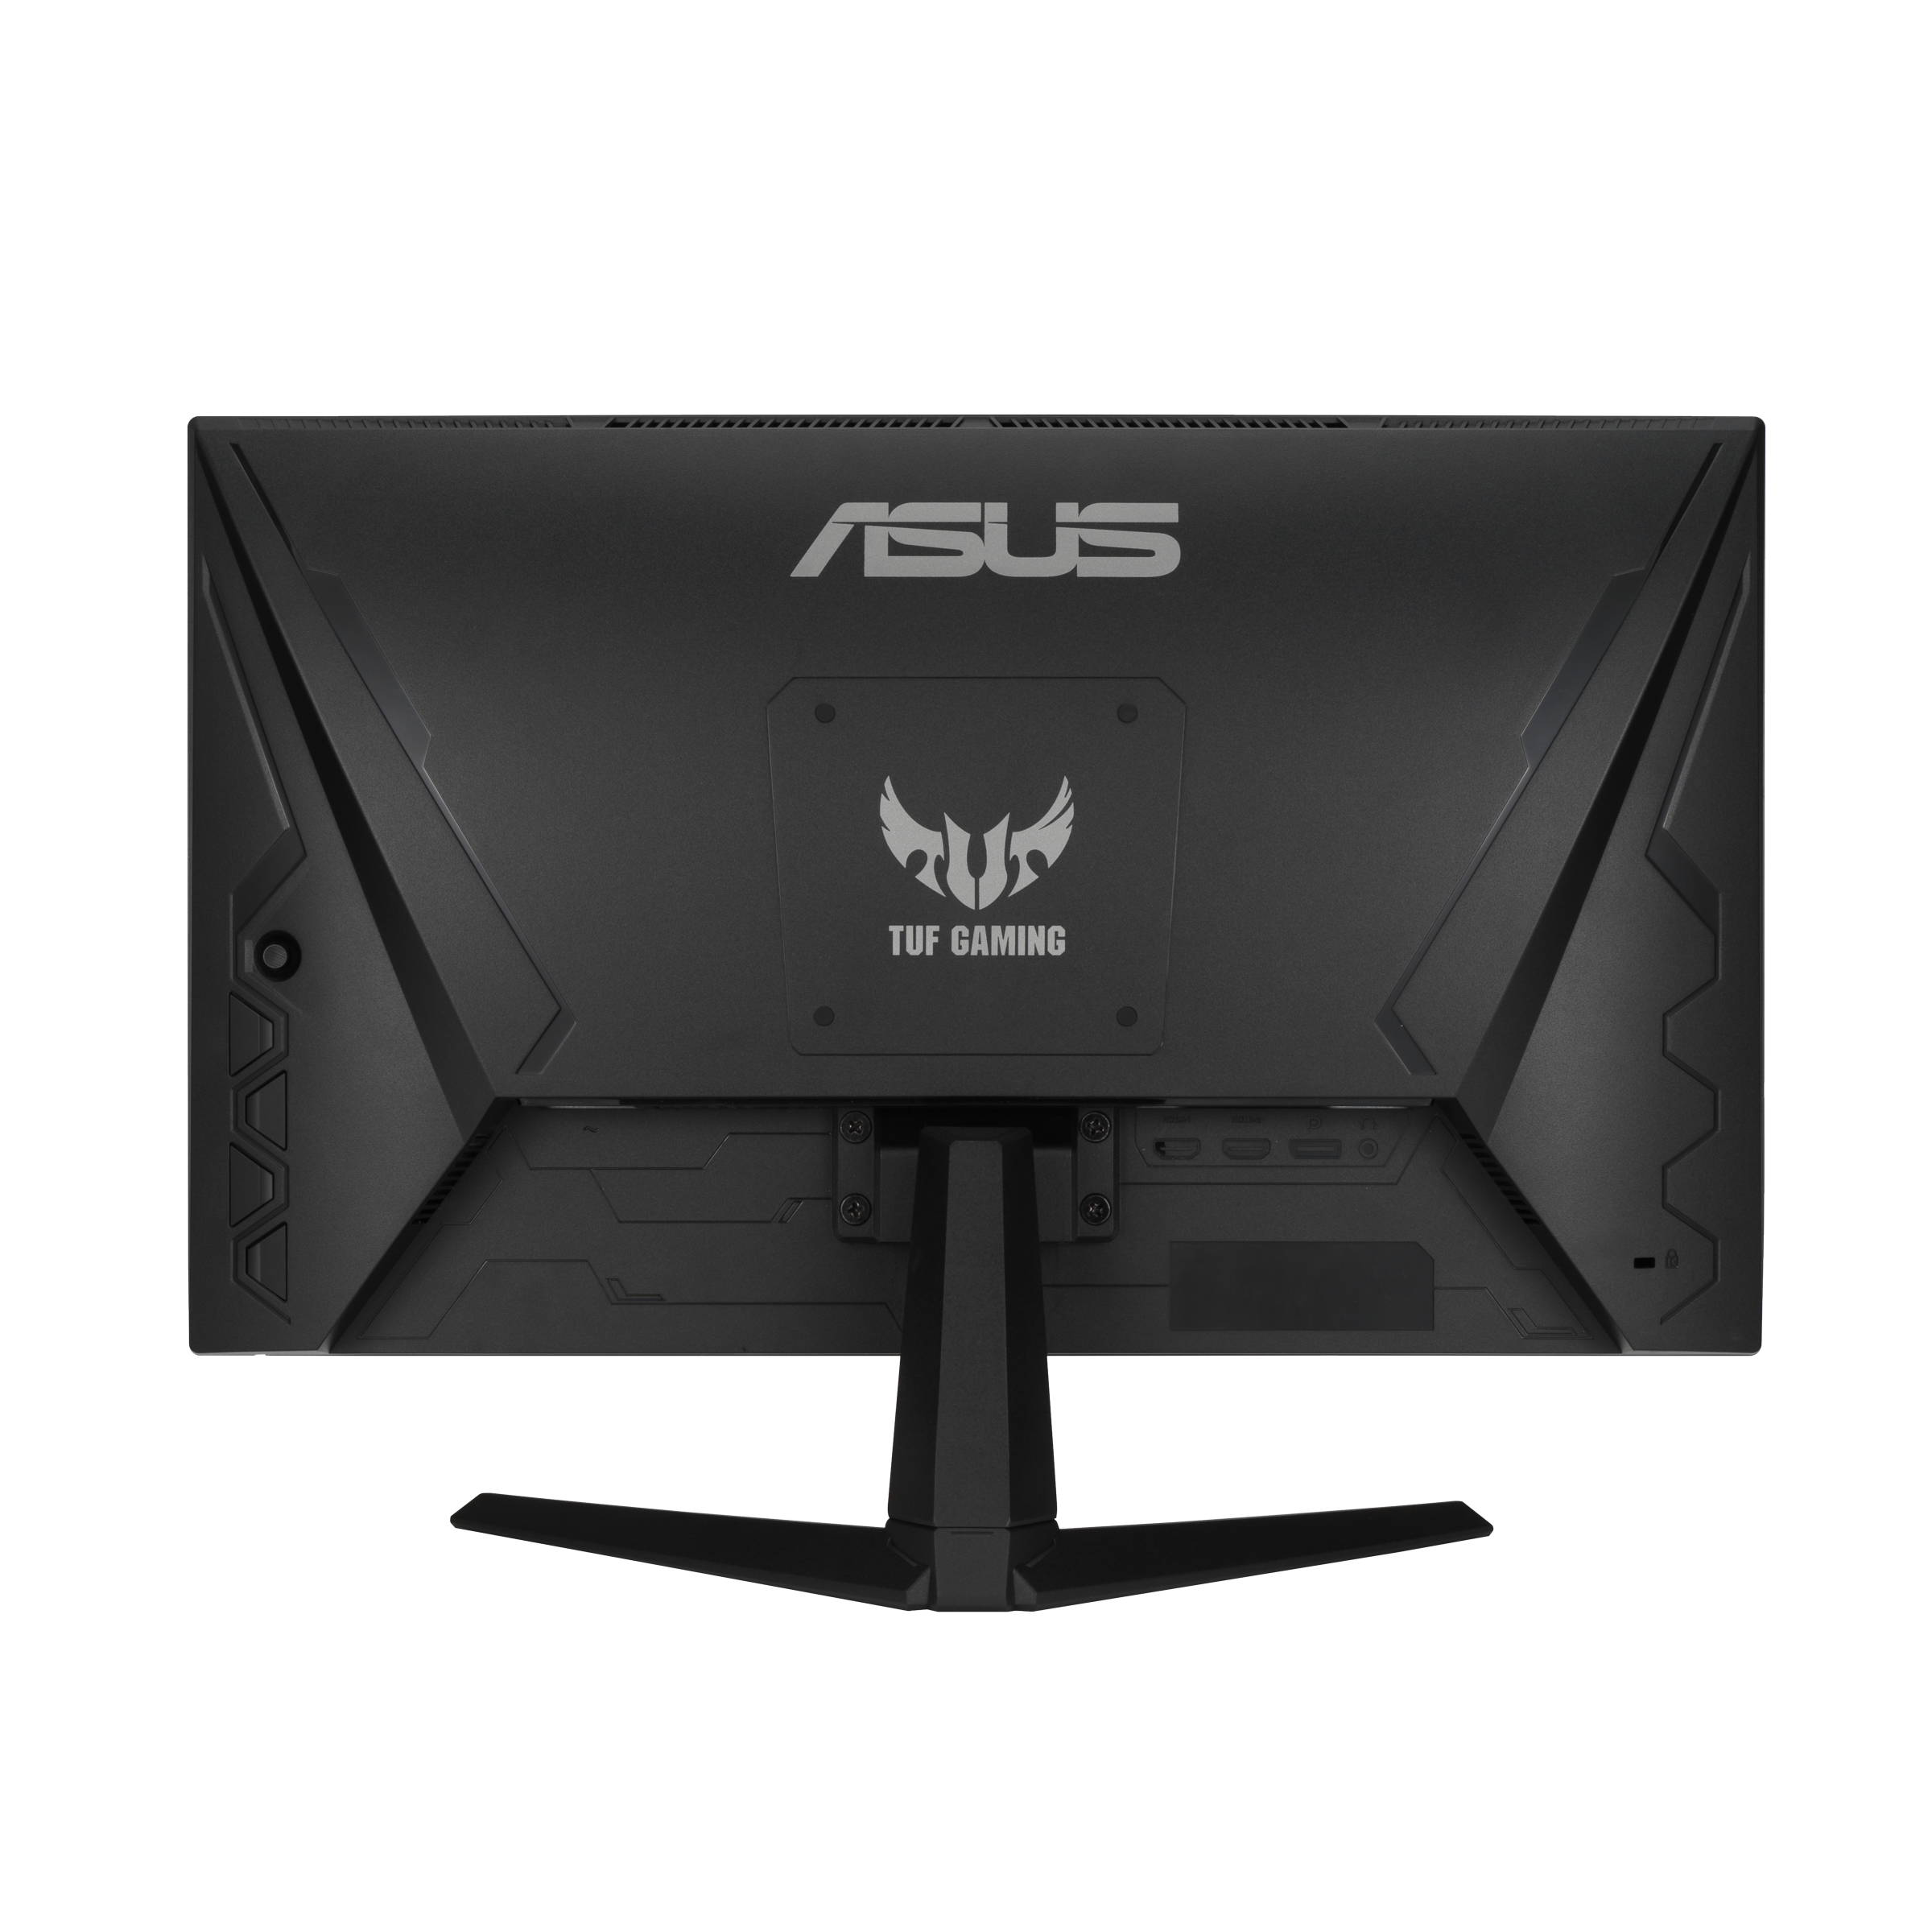 ASUS 23.8” 1080P 165Hz 1ms Gaming Monitor with FreeSync - TUF Gaming  VG247Q1A